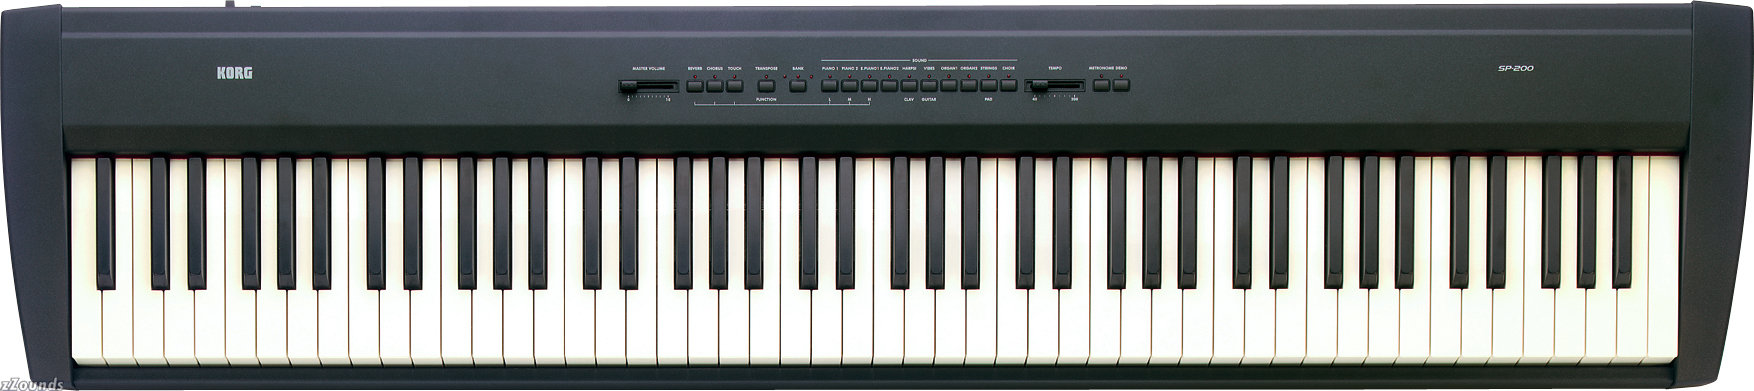 Keyboards For Sale. Casio Keyboard For Sale - 94